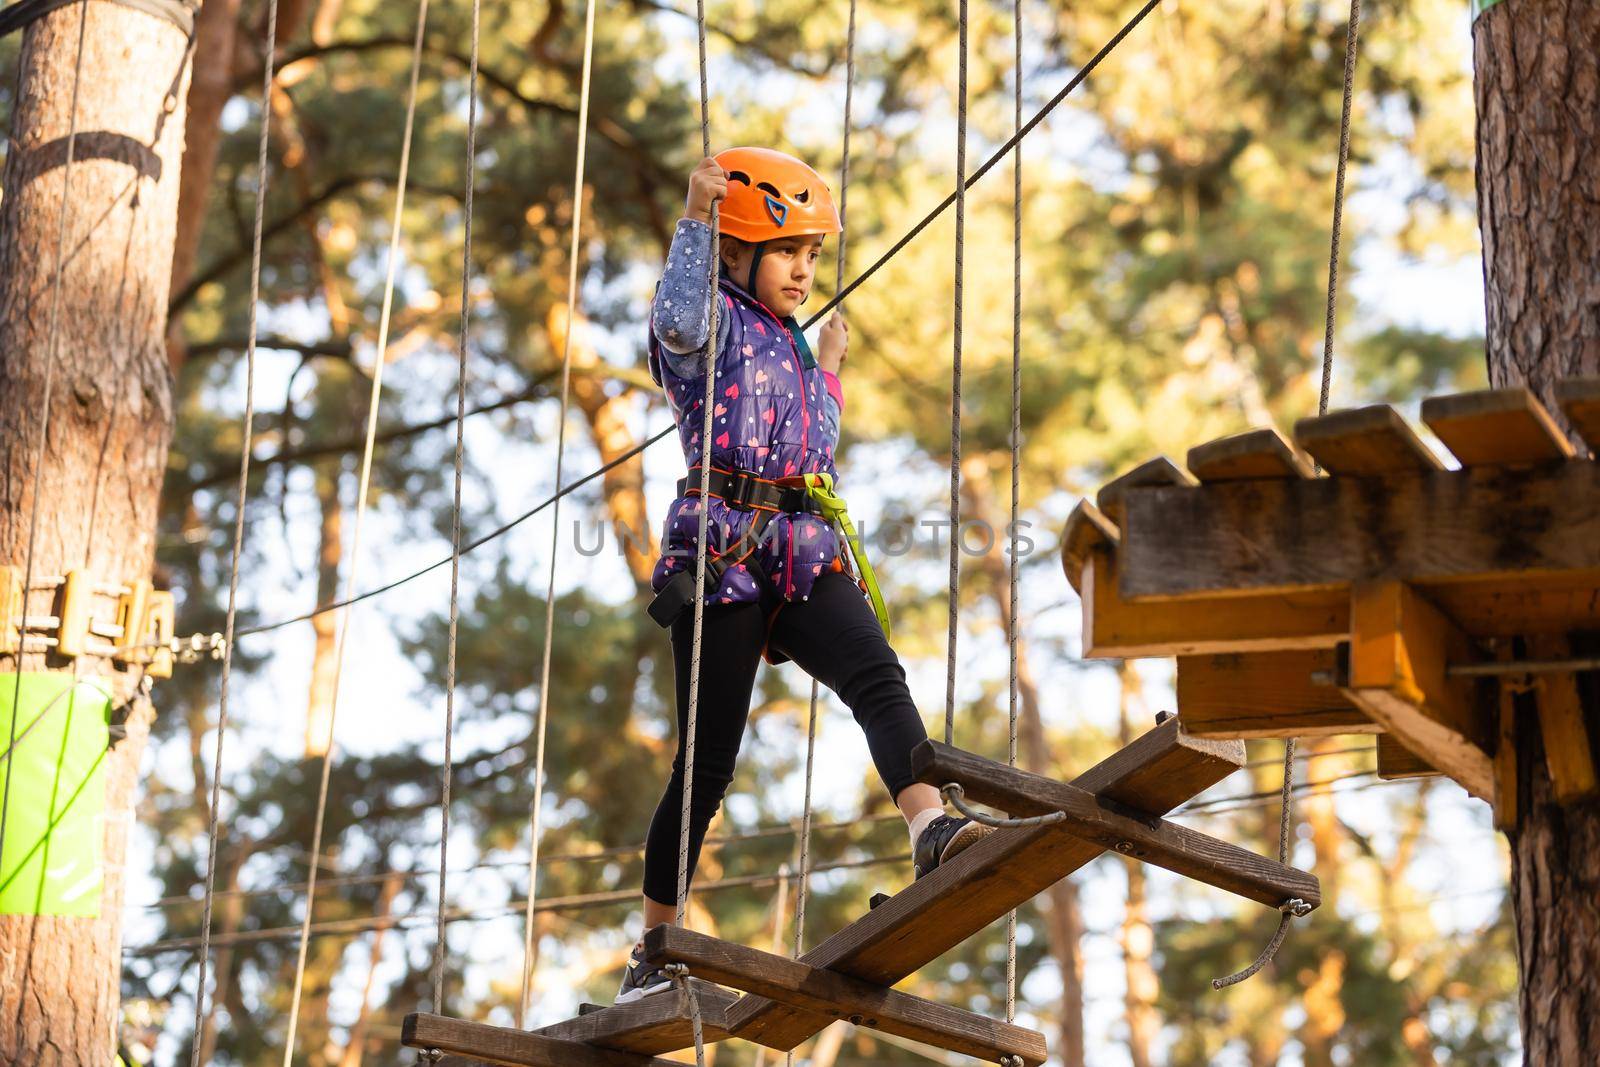 the girl in the orange helmet in the adventure Park holds on to the ropes by Andelov13